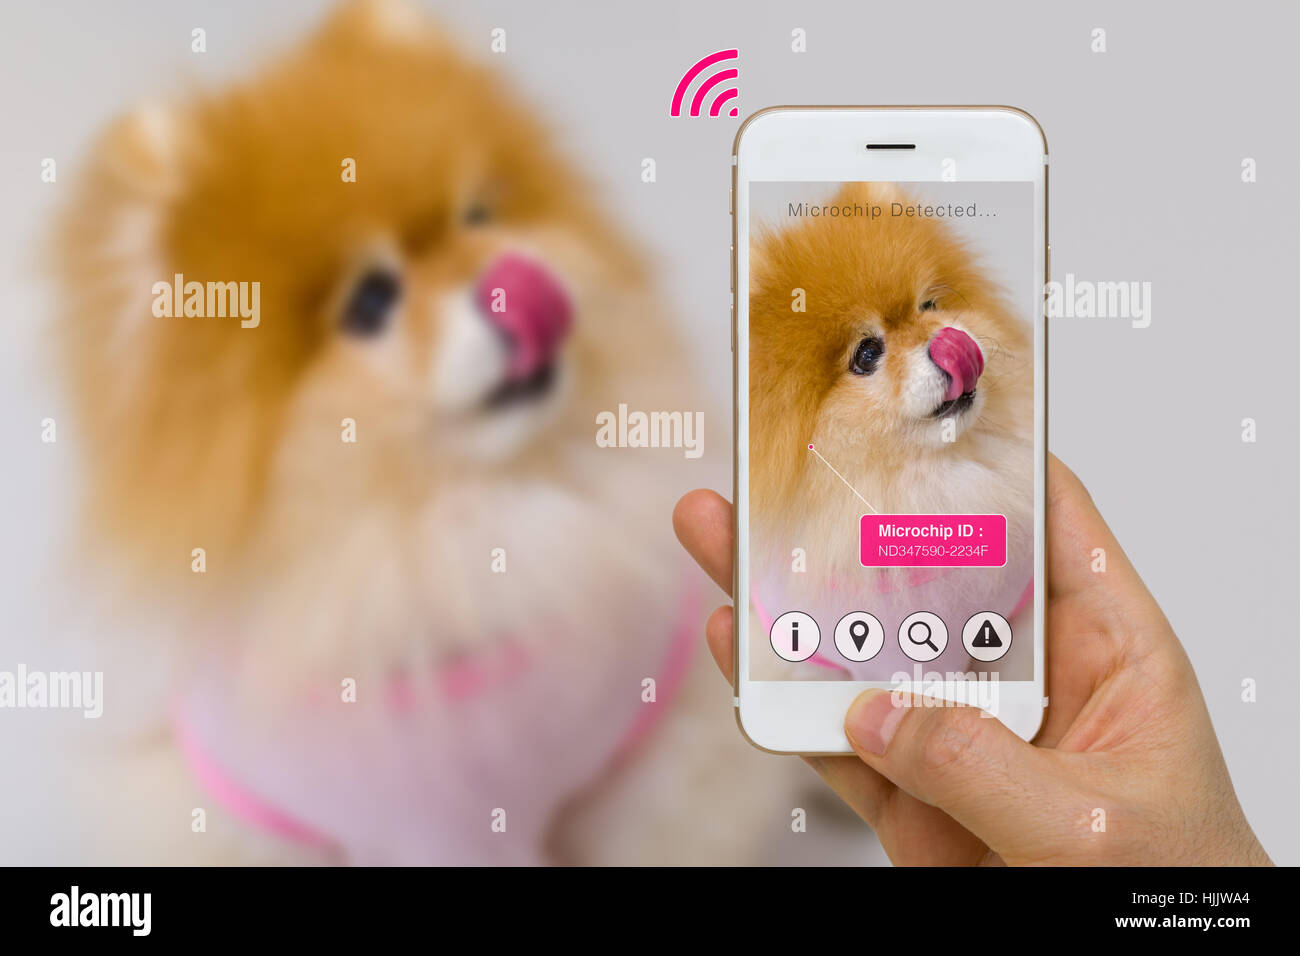 Concept of augmented reality of pet microchip app on smartphone. Stock Photo